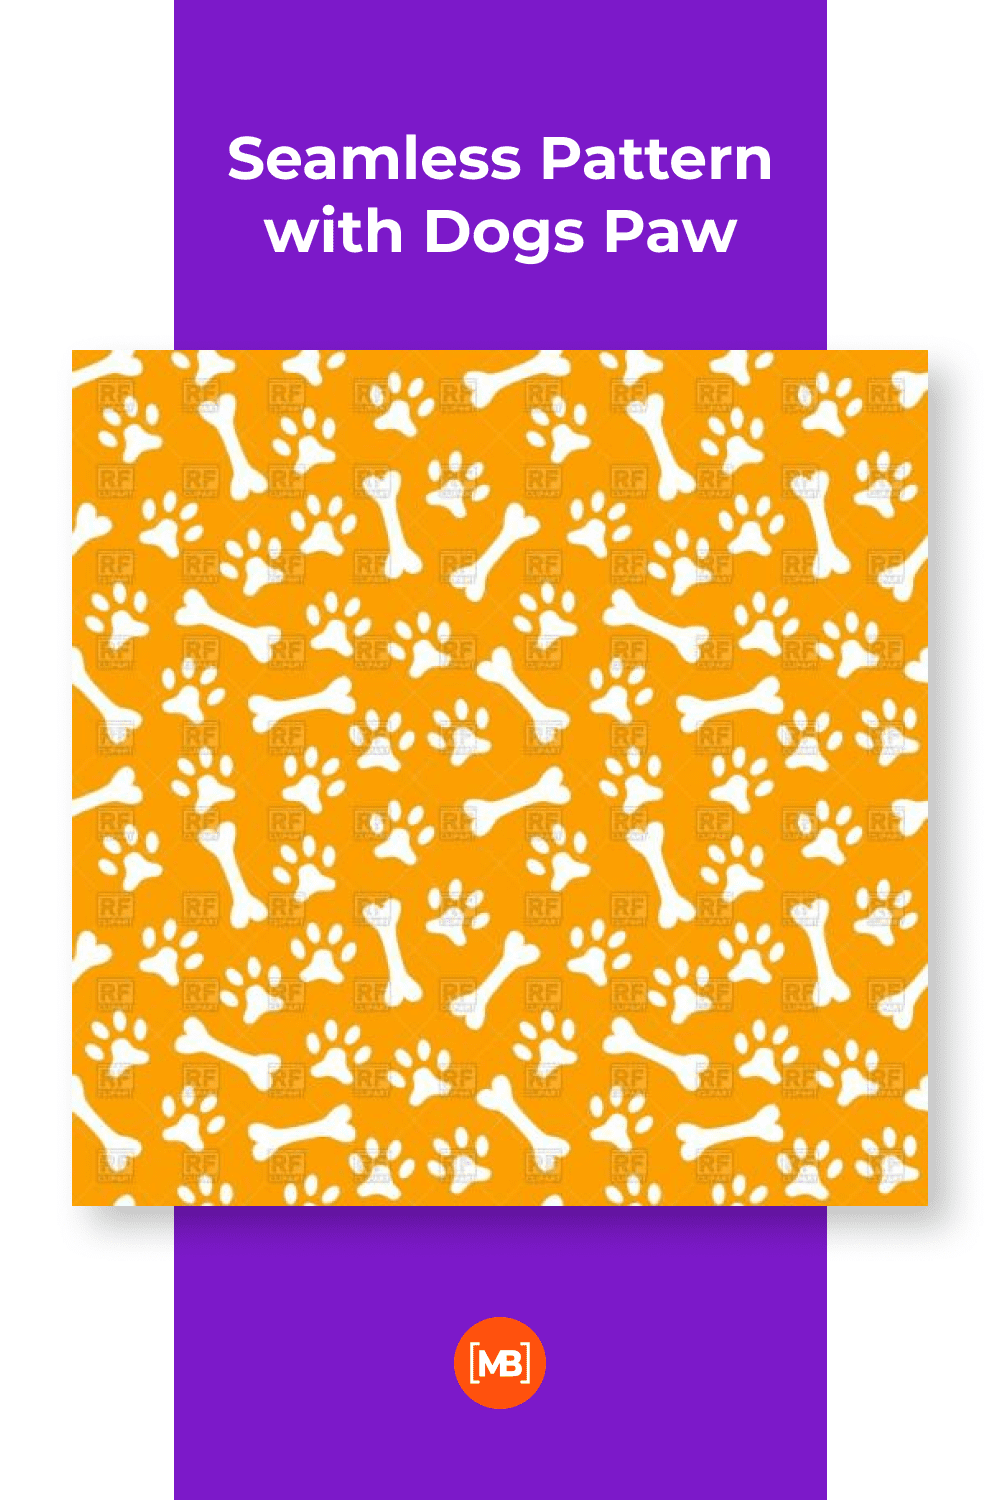 Seamless Pattern with Dogs Paw.